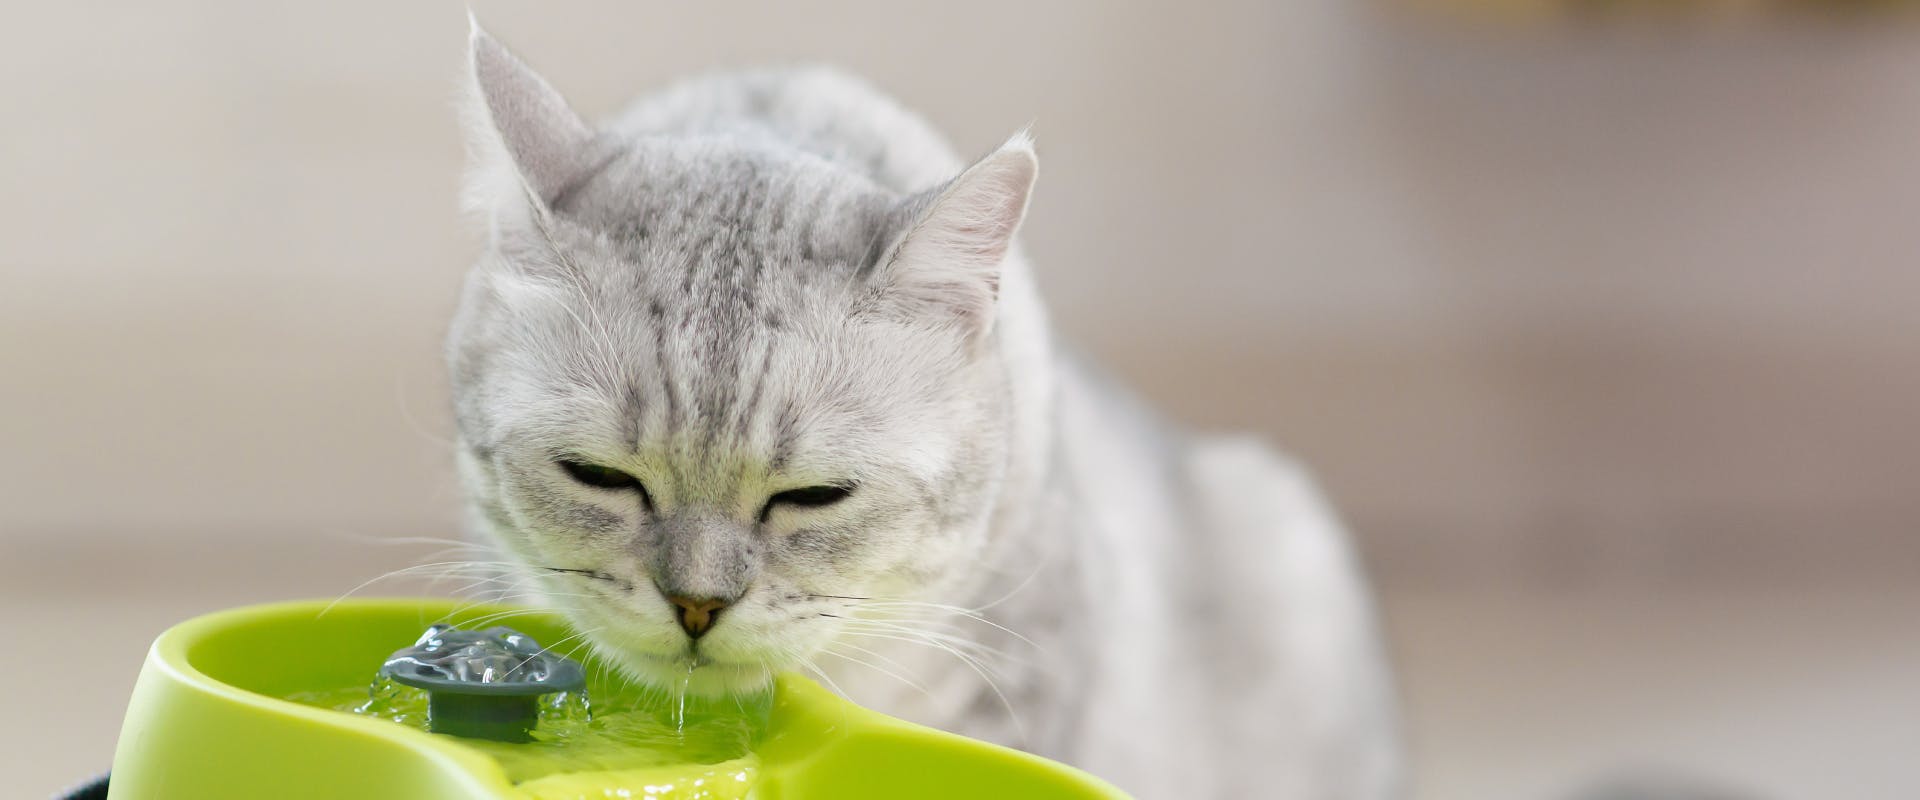 a dehydrated cat drinking from a green cat water fountain